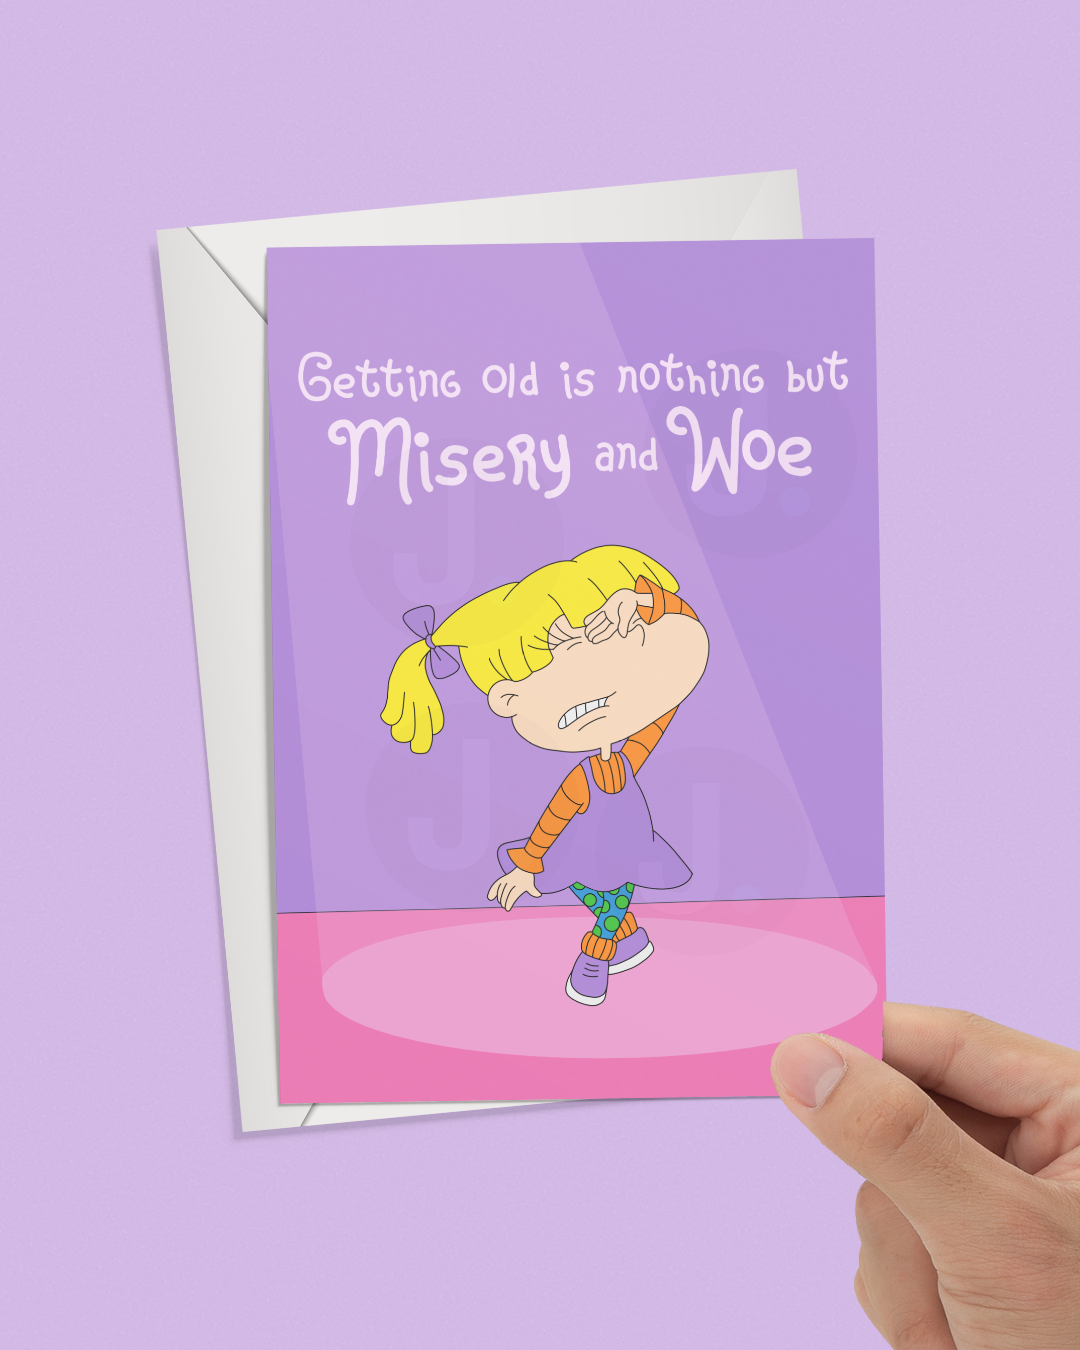 1990s Cartoon Inspired Card - Getting Old Is Nothing But Misery And Woe Card - 1990s Cartoon Rugrats Inspired Birthday Card